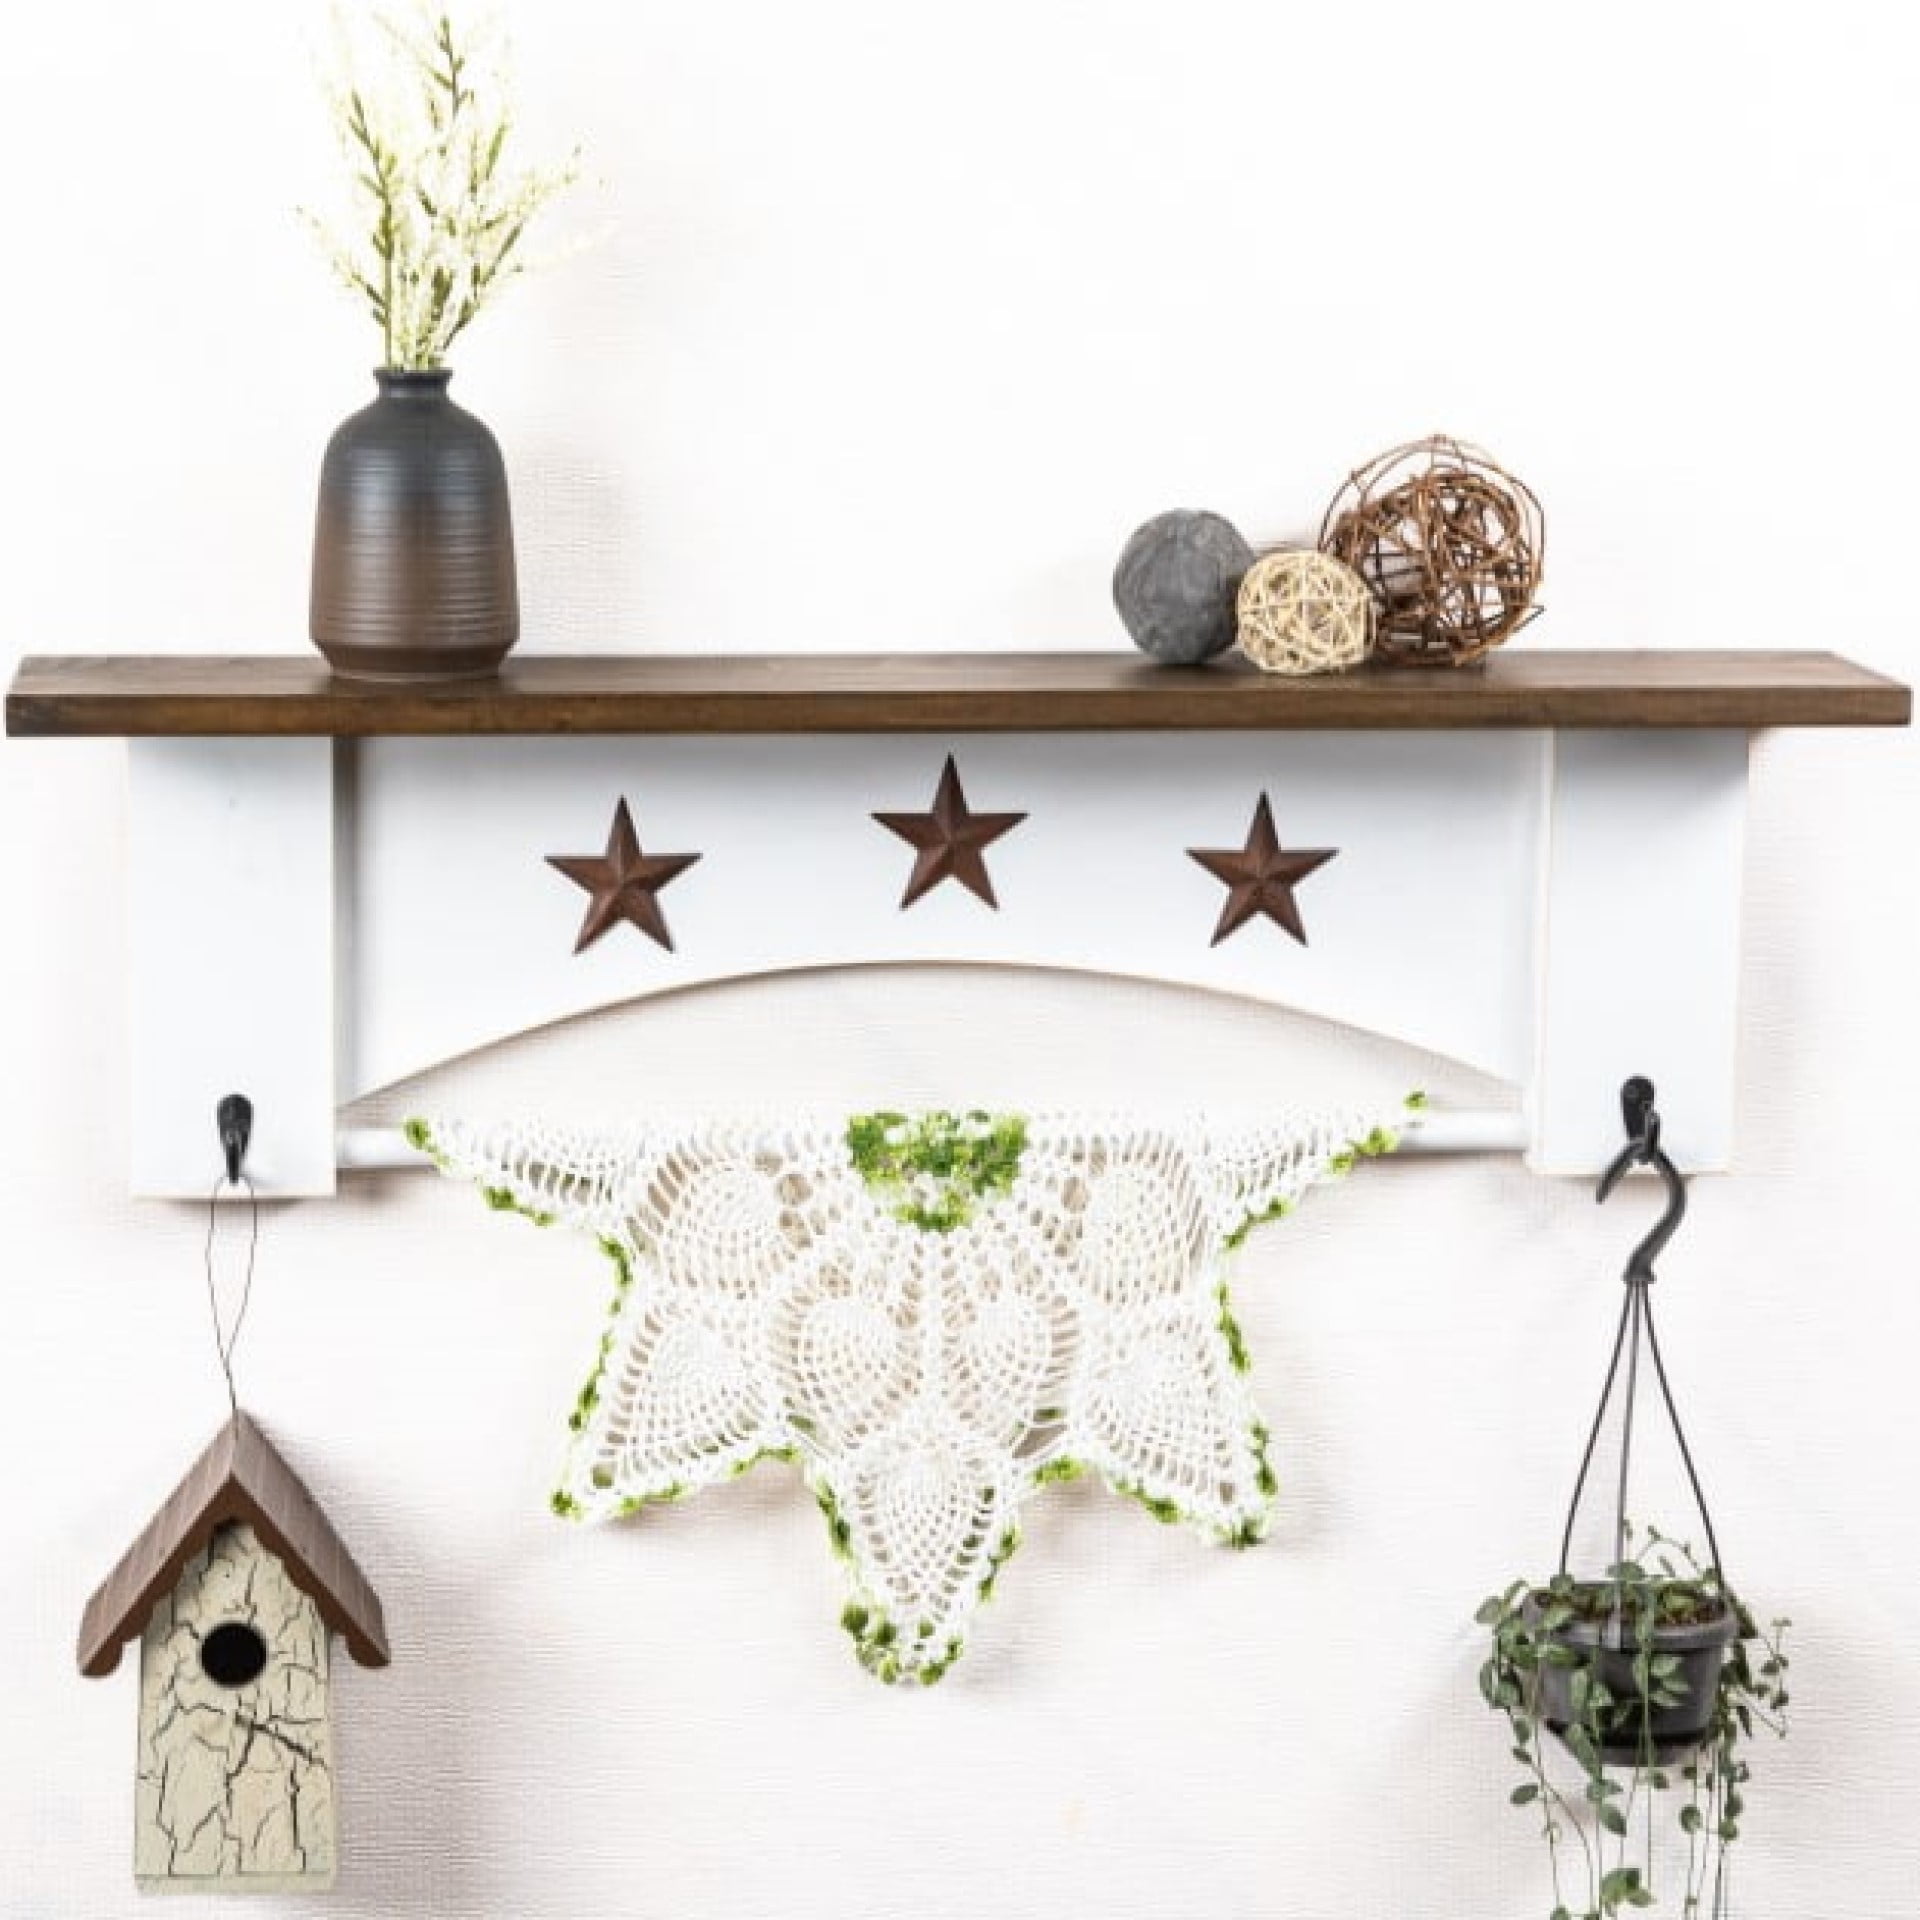 Hanging Shelf with Hooks and Wooden Dowel Rod